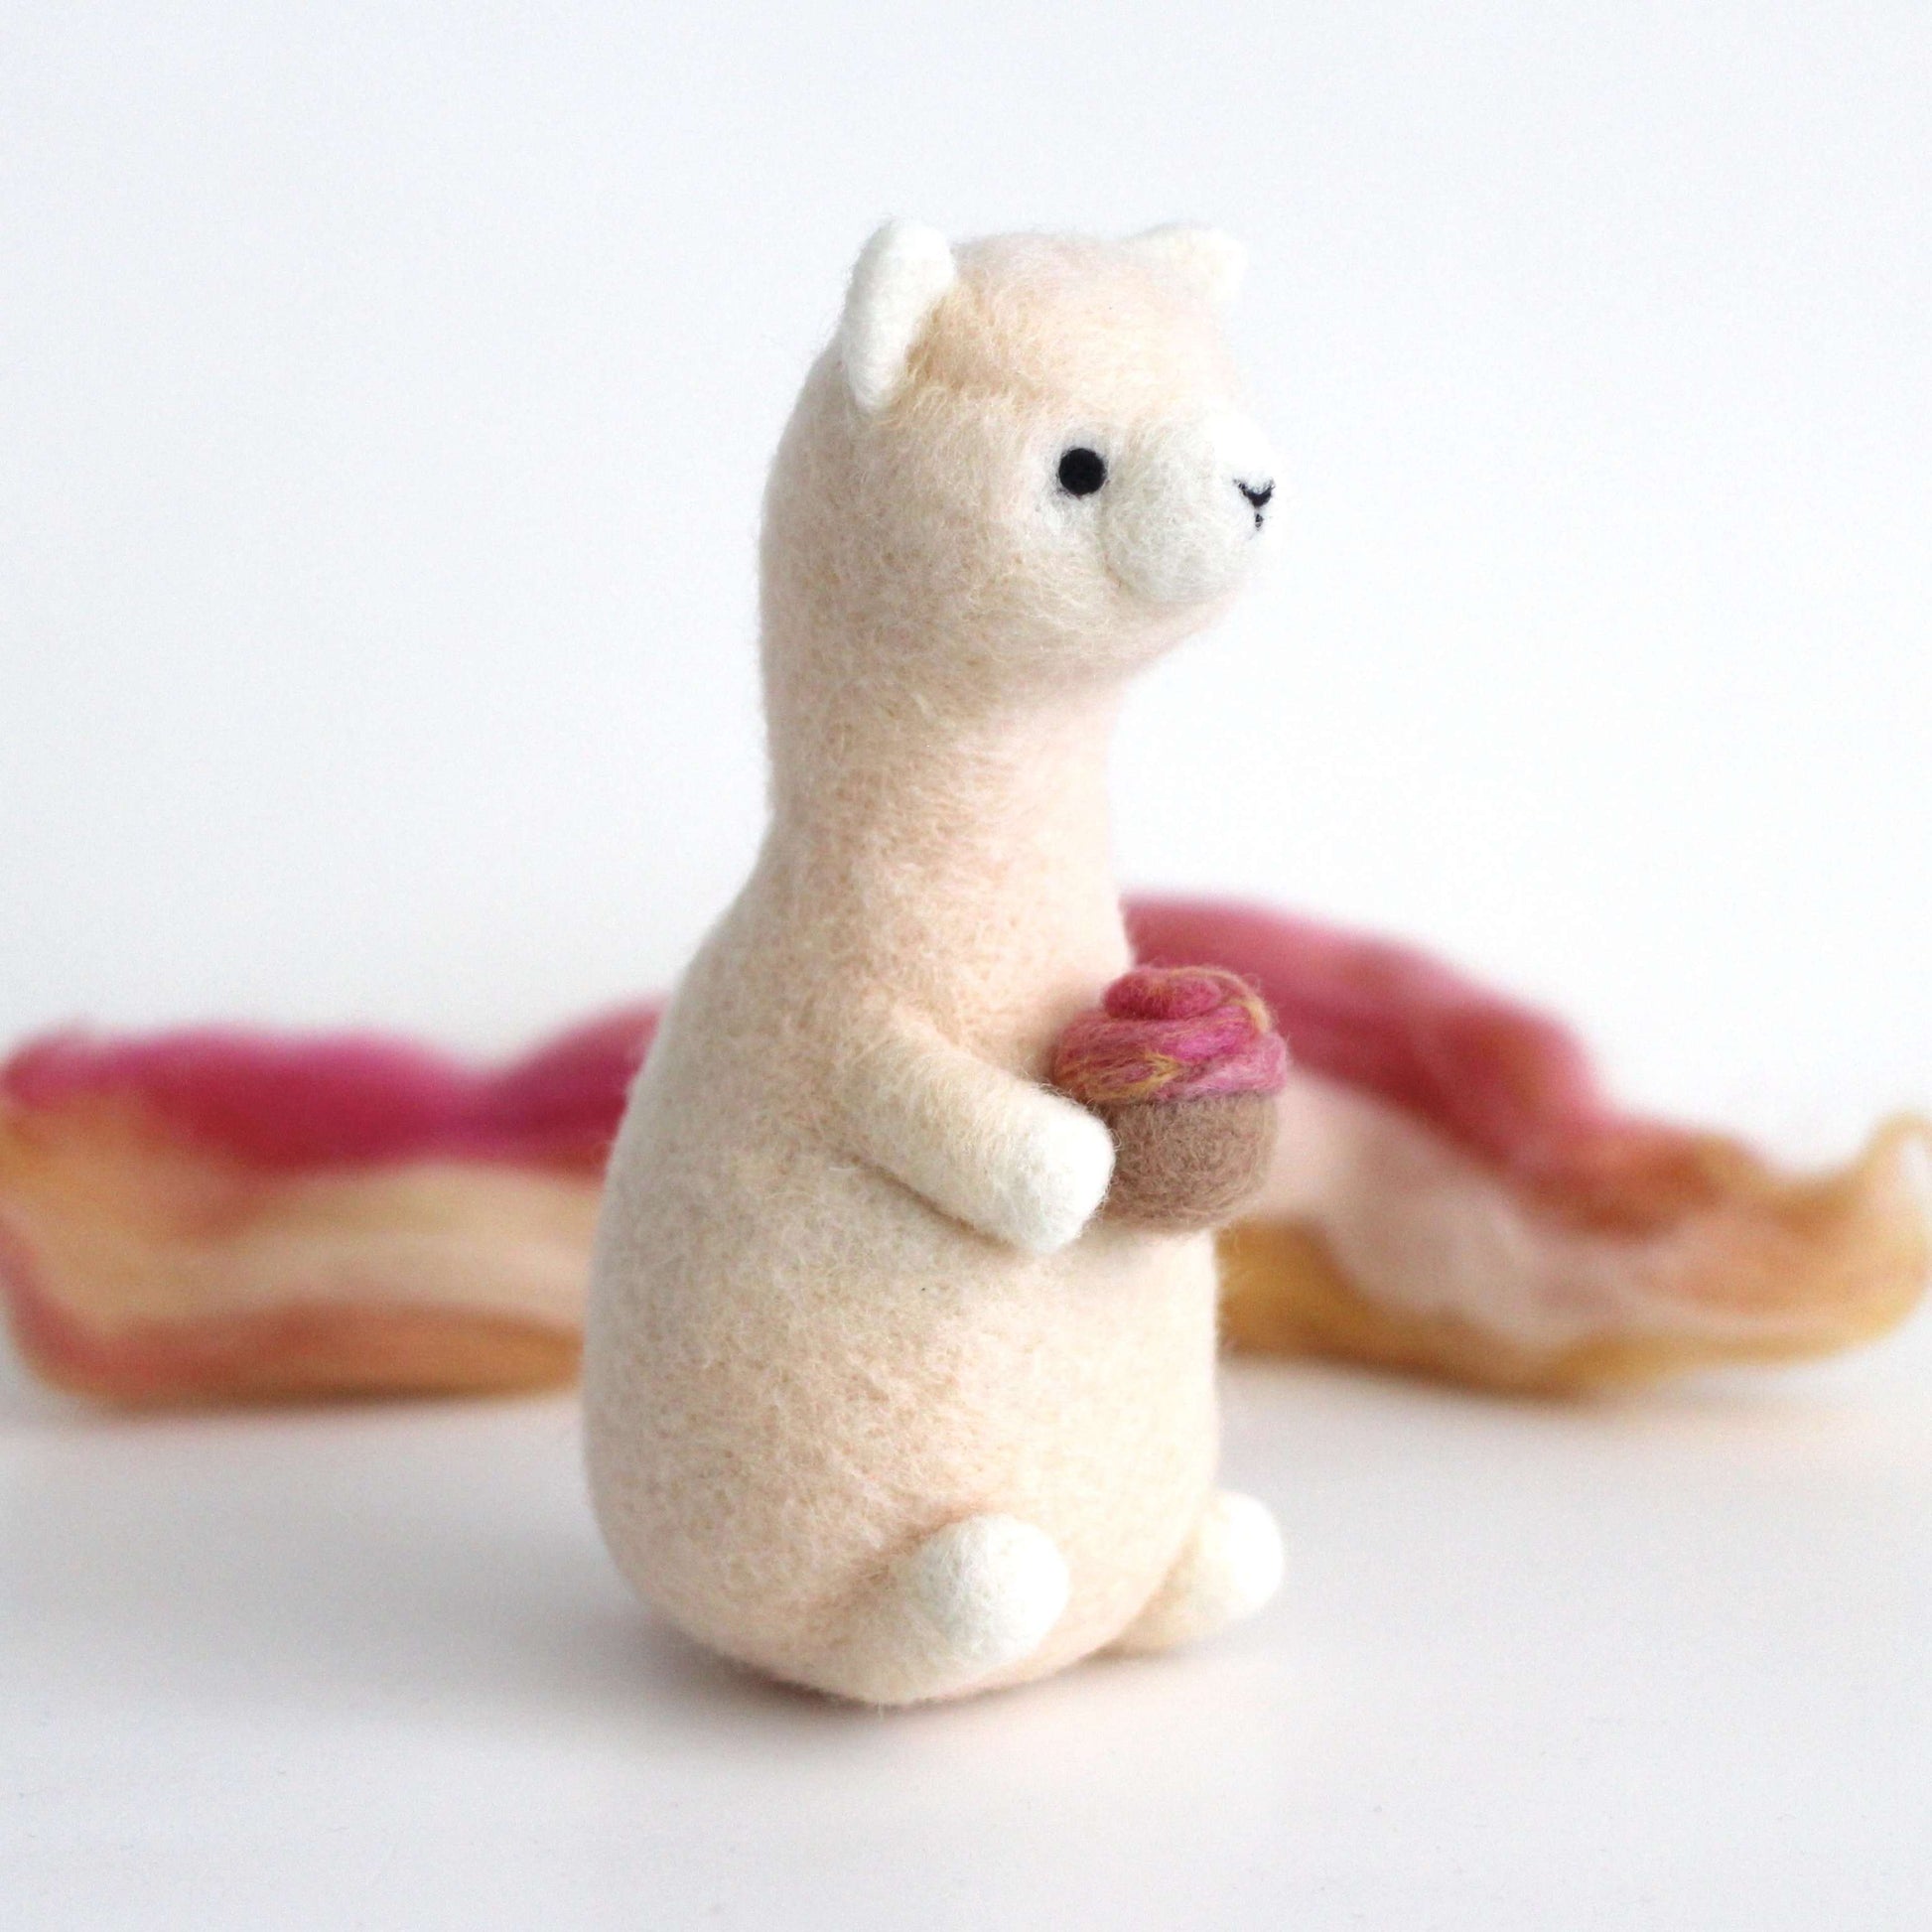 Needle Felted Alpaca holding Cupcake by Wild Whimsy Woolies